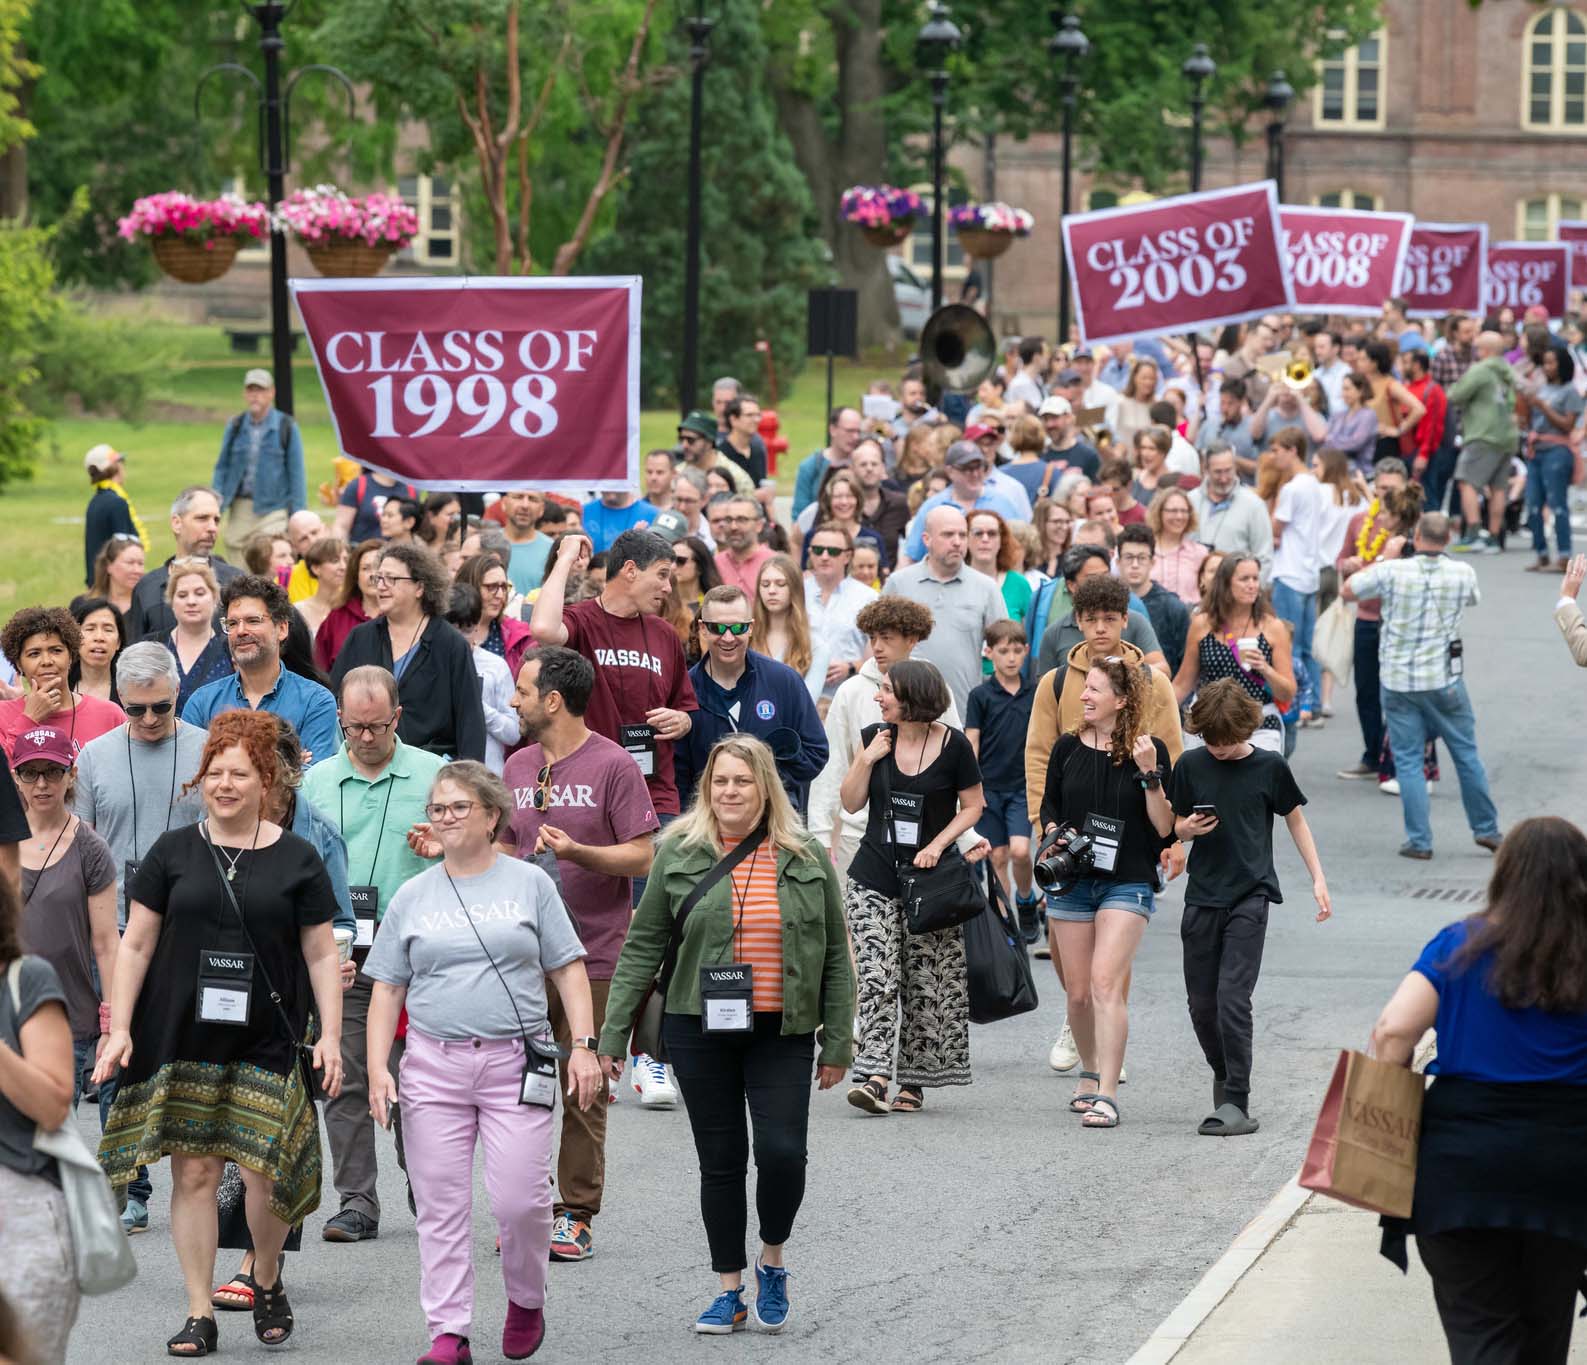 a large group of people walking along a campus road, with some banners displaying class years